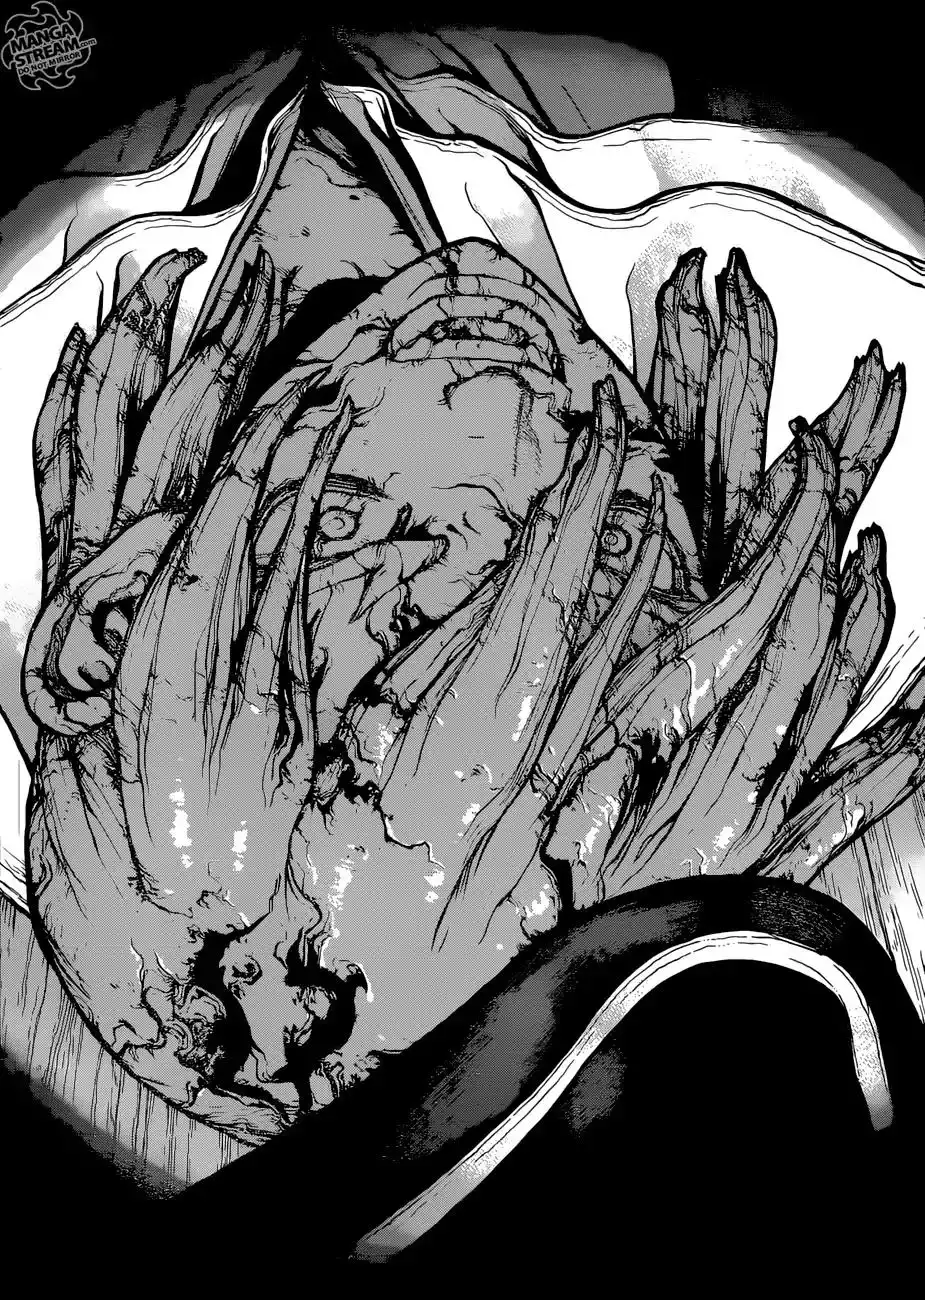 Dr. Stone Chapter 103